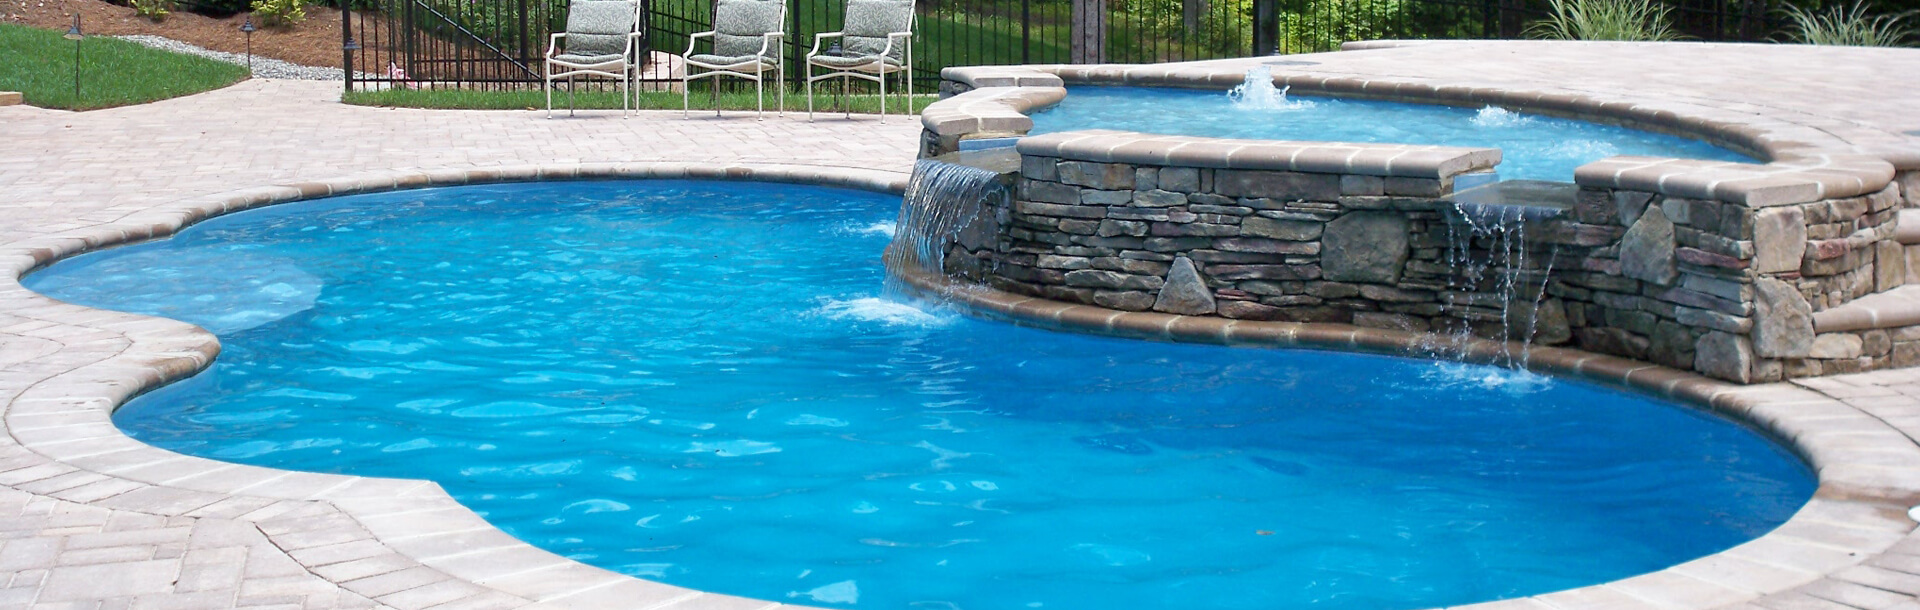 aquacade outdoor inground pool with waterfall and fountain